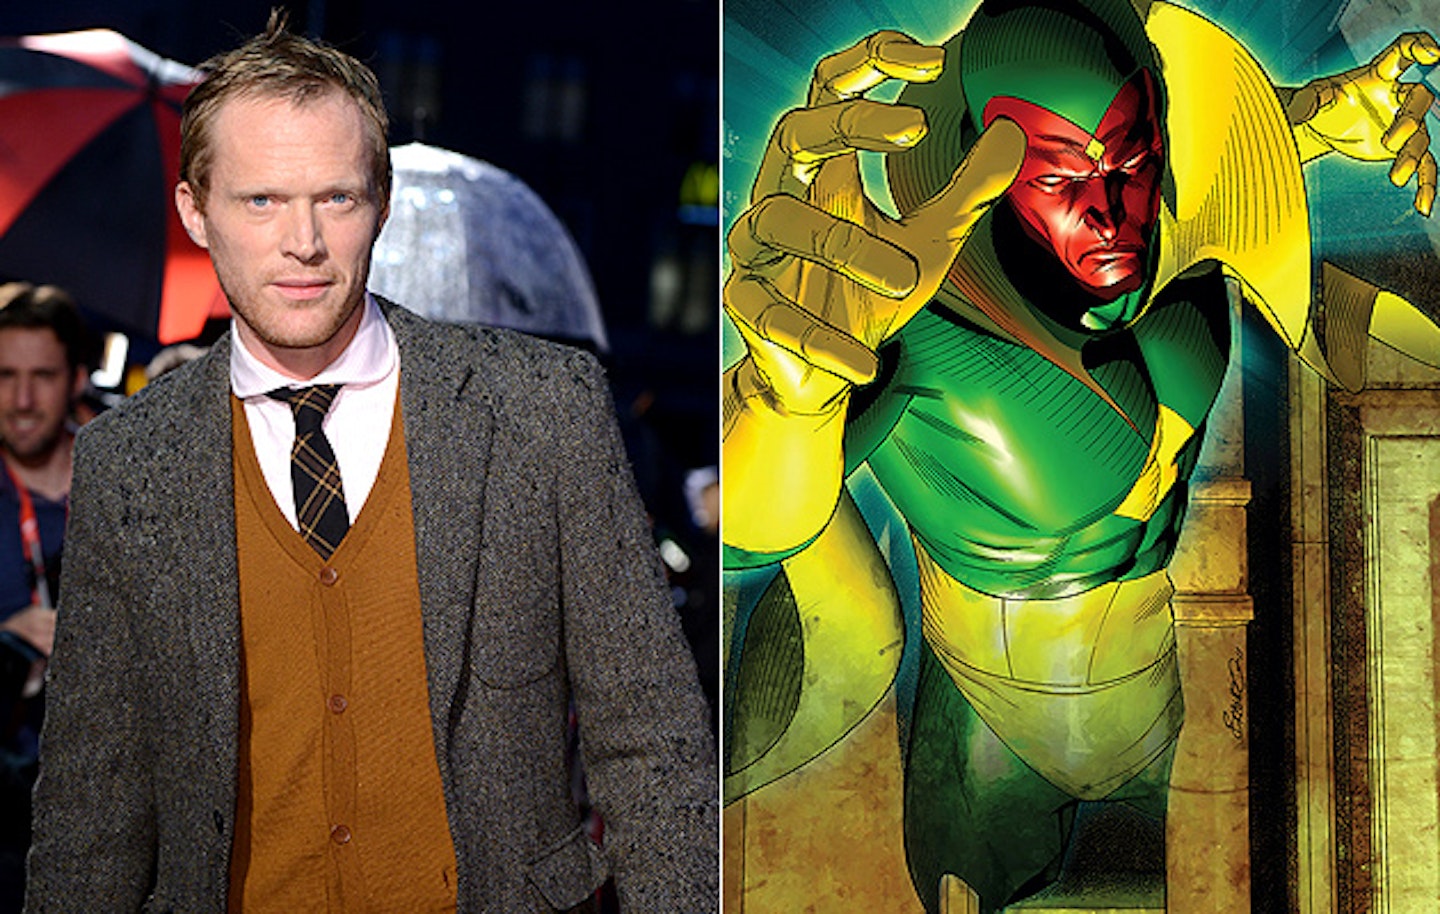 Paul-Bettany-Will-Be-The-Avengers-Sequels-Vision